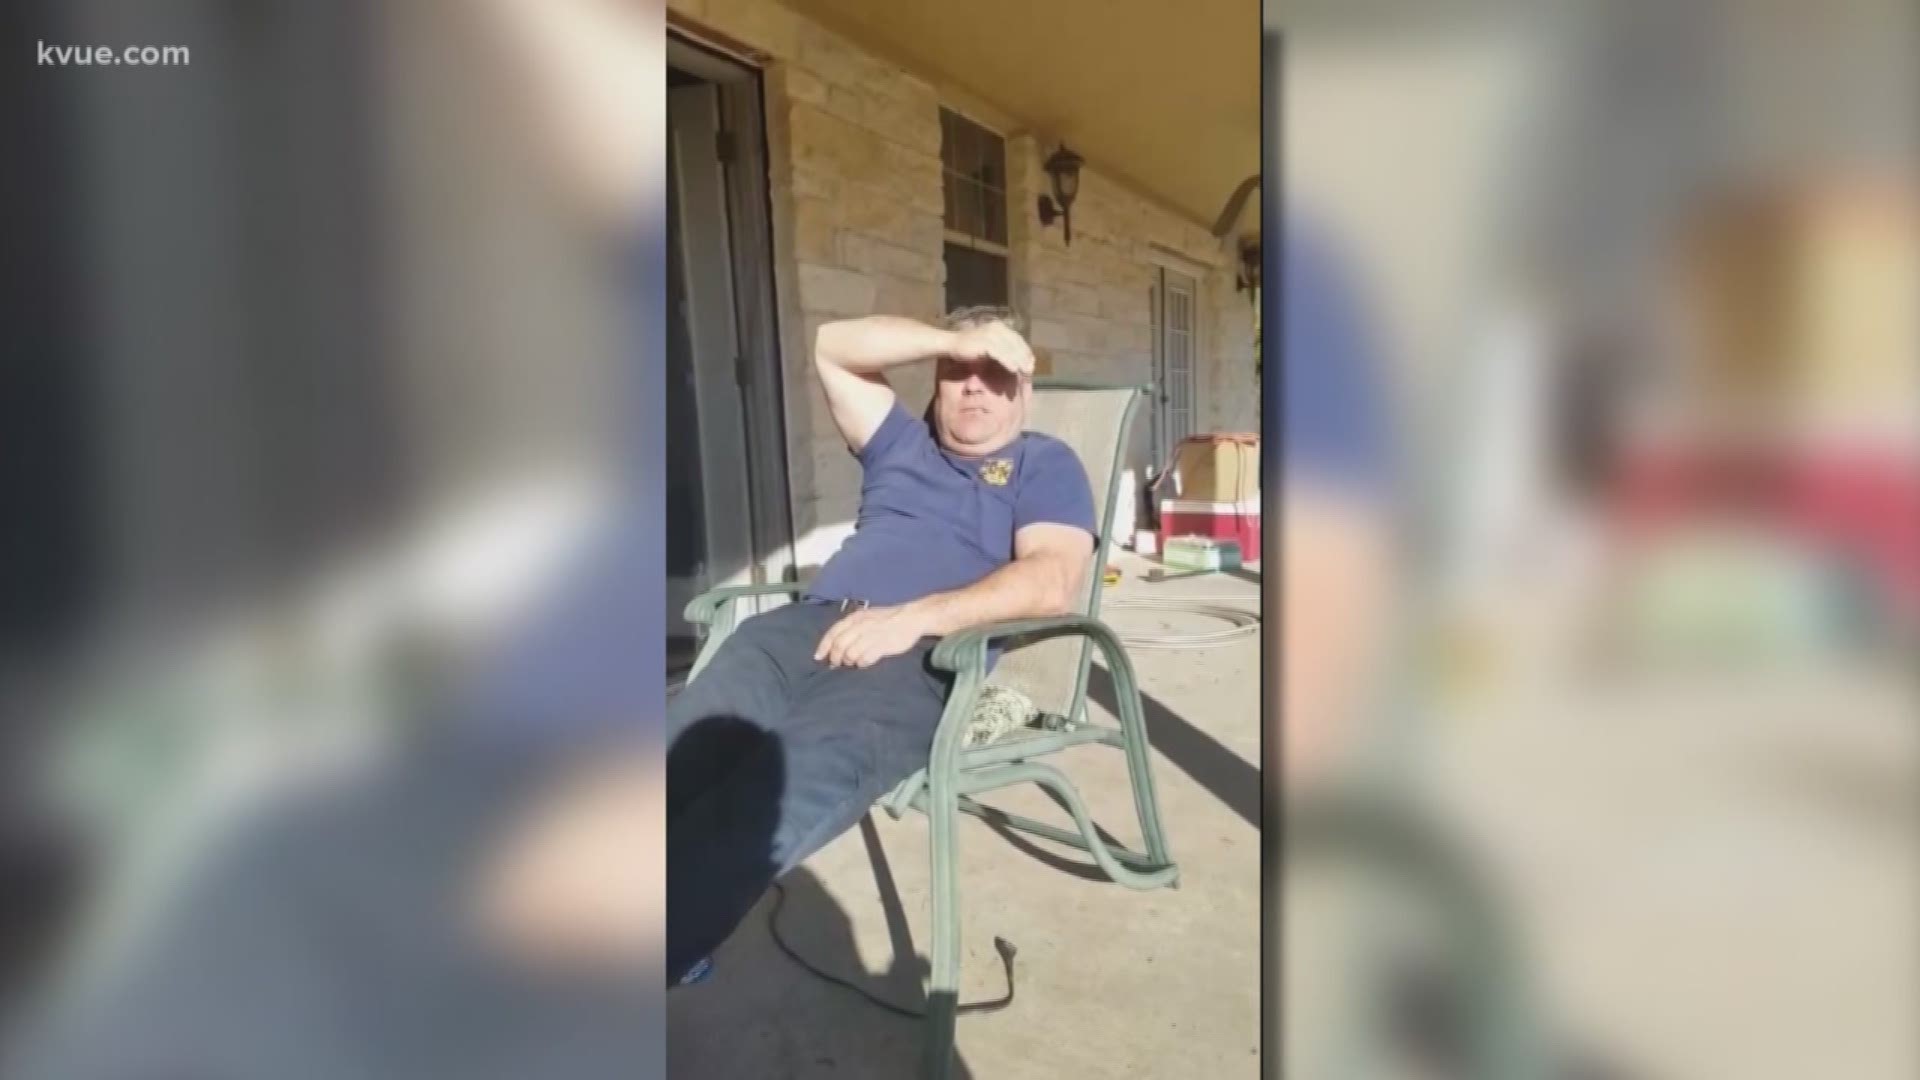 A man who spent more than two decades with the Austin Fire Department is under investigation after a video surfaced online portraying him describing exchanging money for child porn.